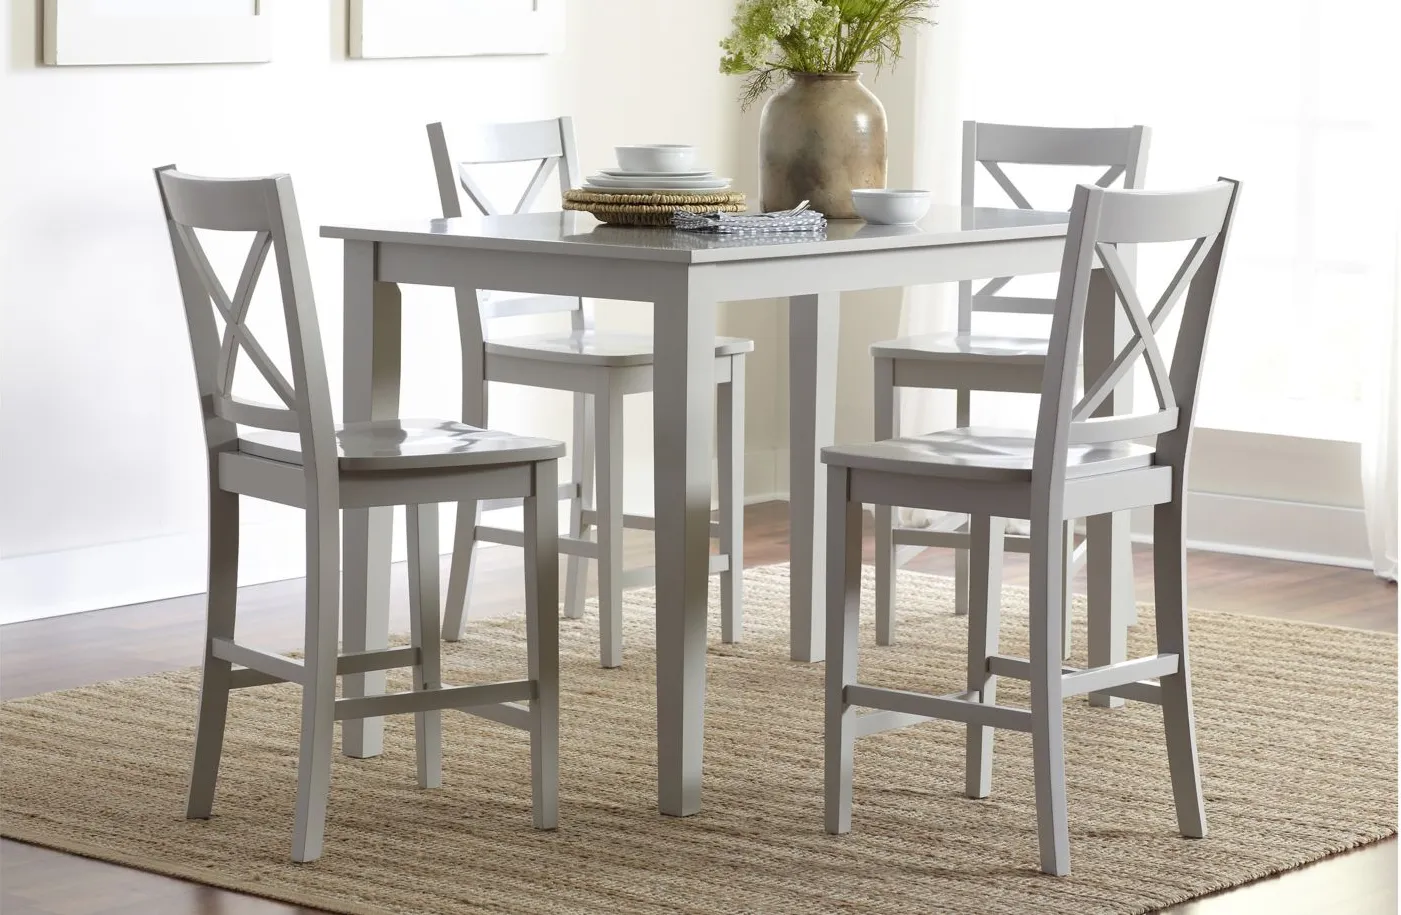 Simplicity 5-pc. Counter-Height Dining Set in Dove by Jofran